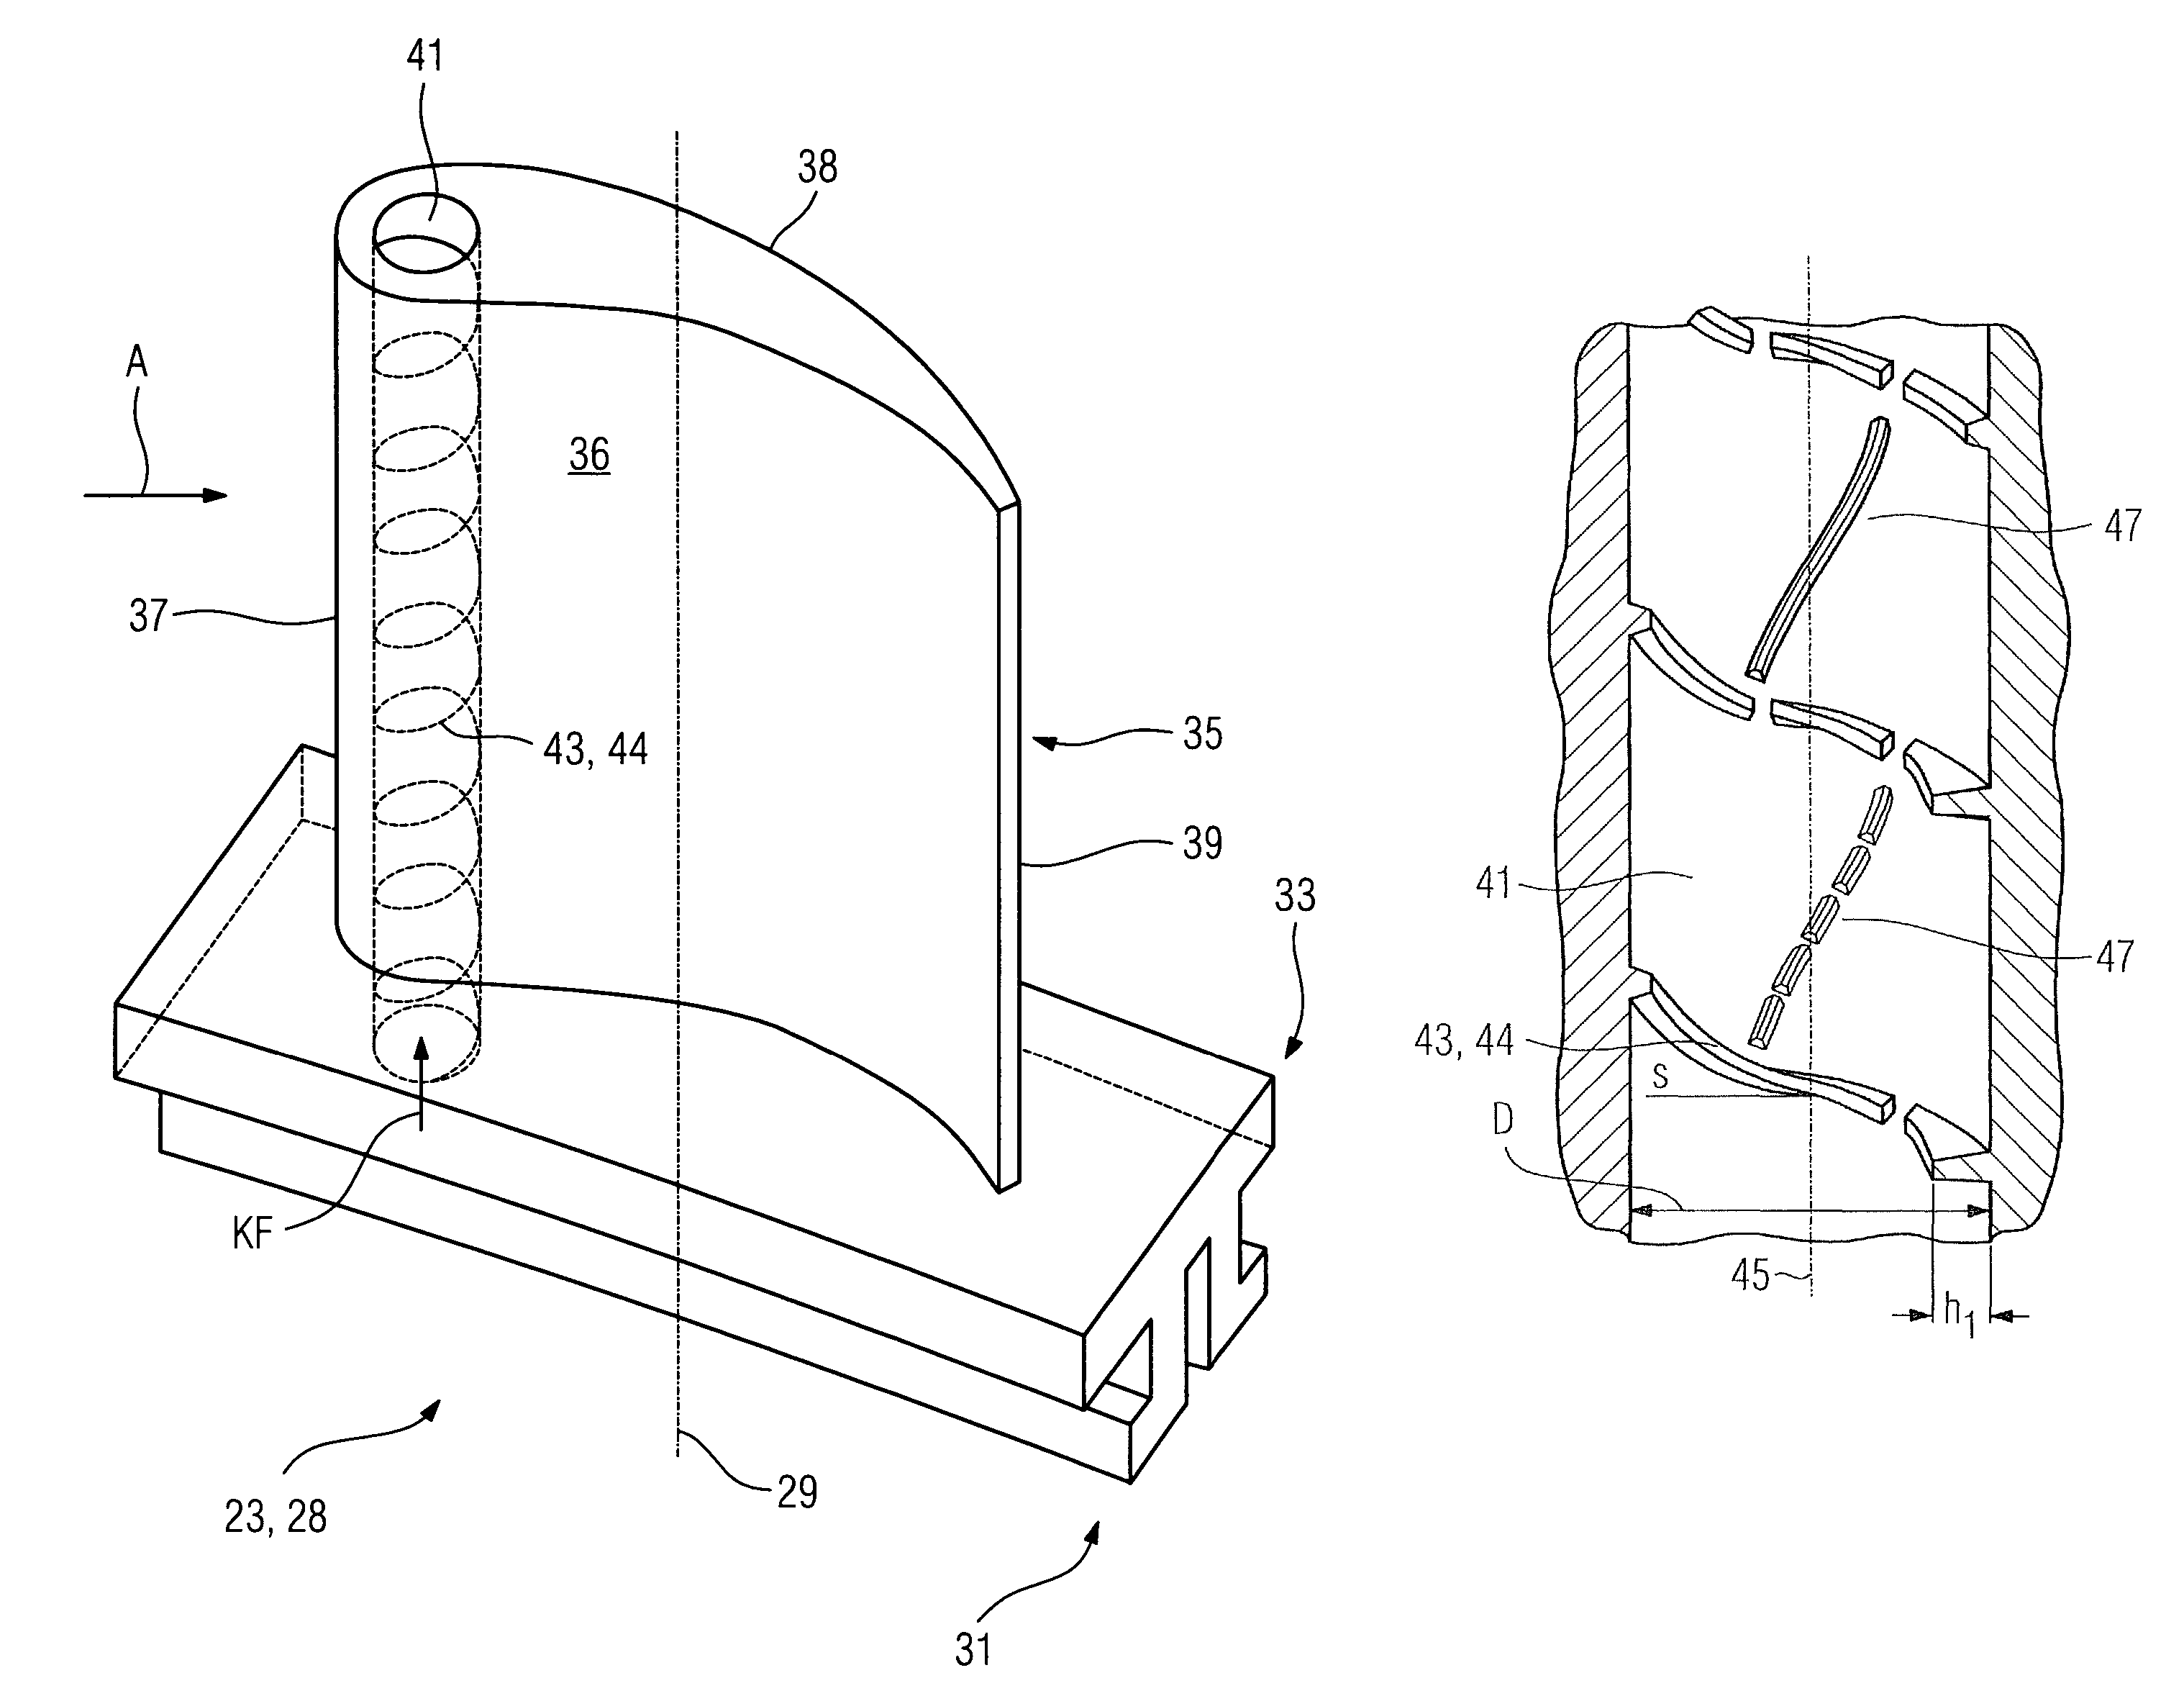 Cooled component of a fluid-flow machine, method of casting a cooled component, and a gas turbine